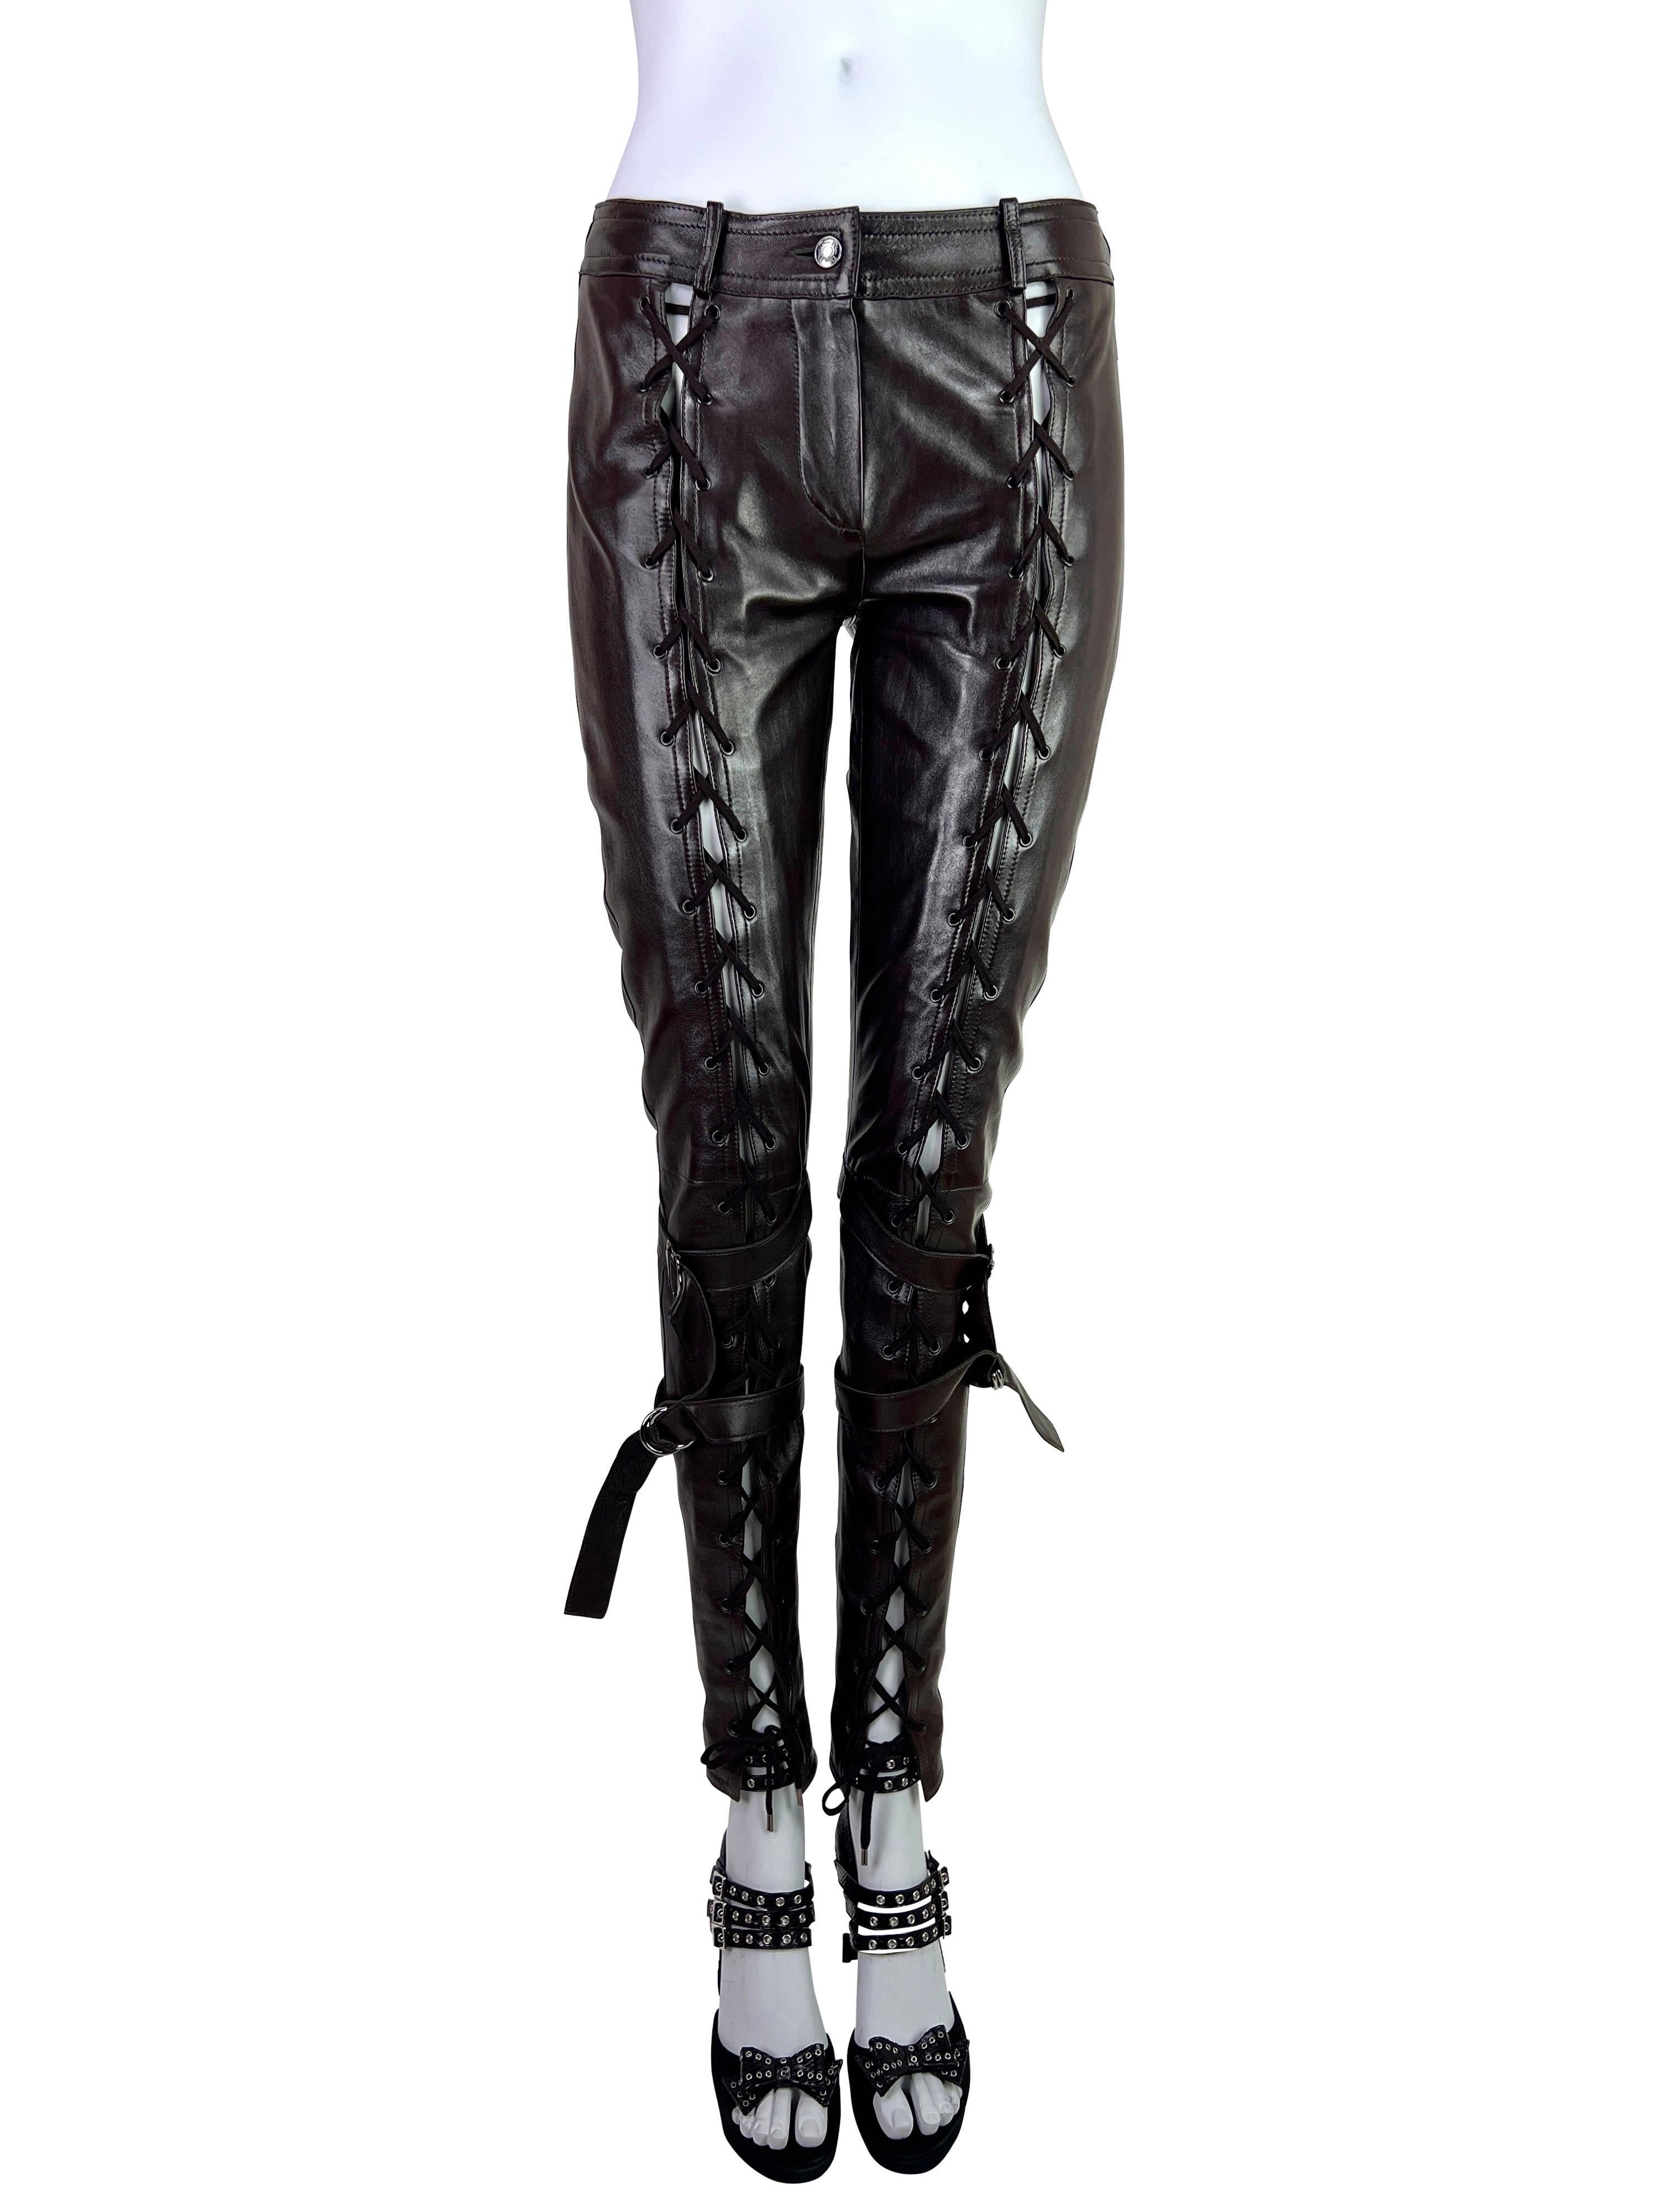 Dior by John Galliano Fall 2003 Leather Lace-Up Pants in Dark Chocolate For Sale 1